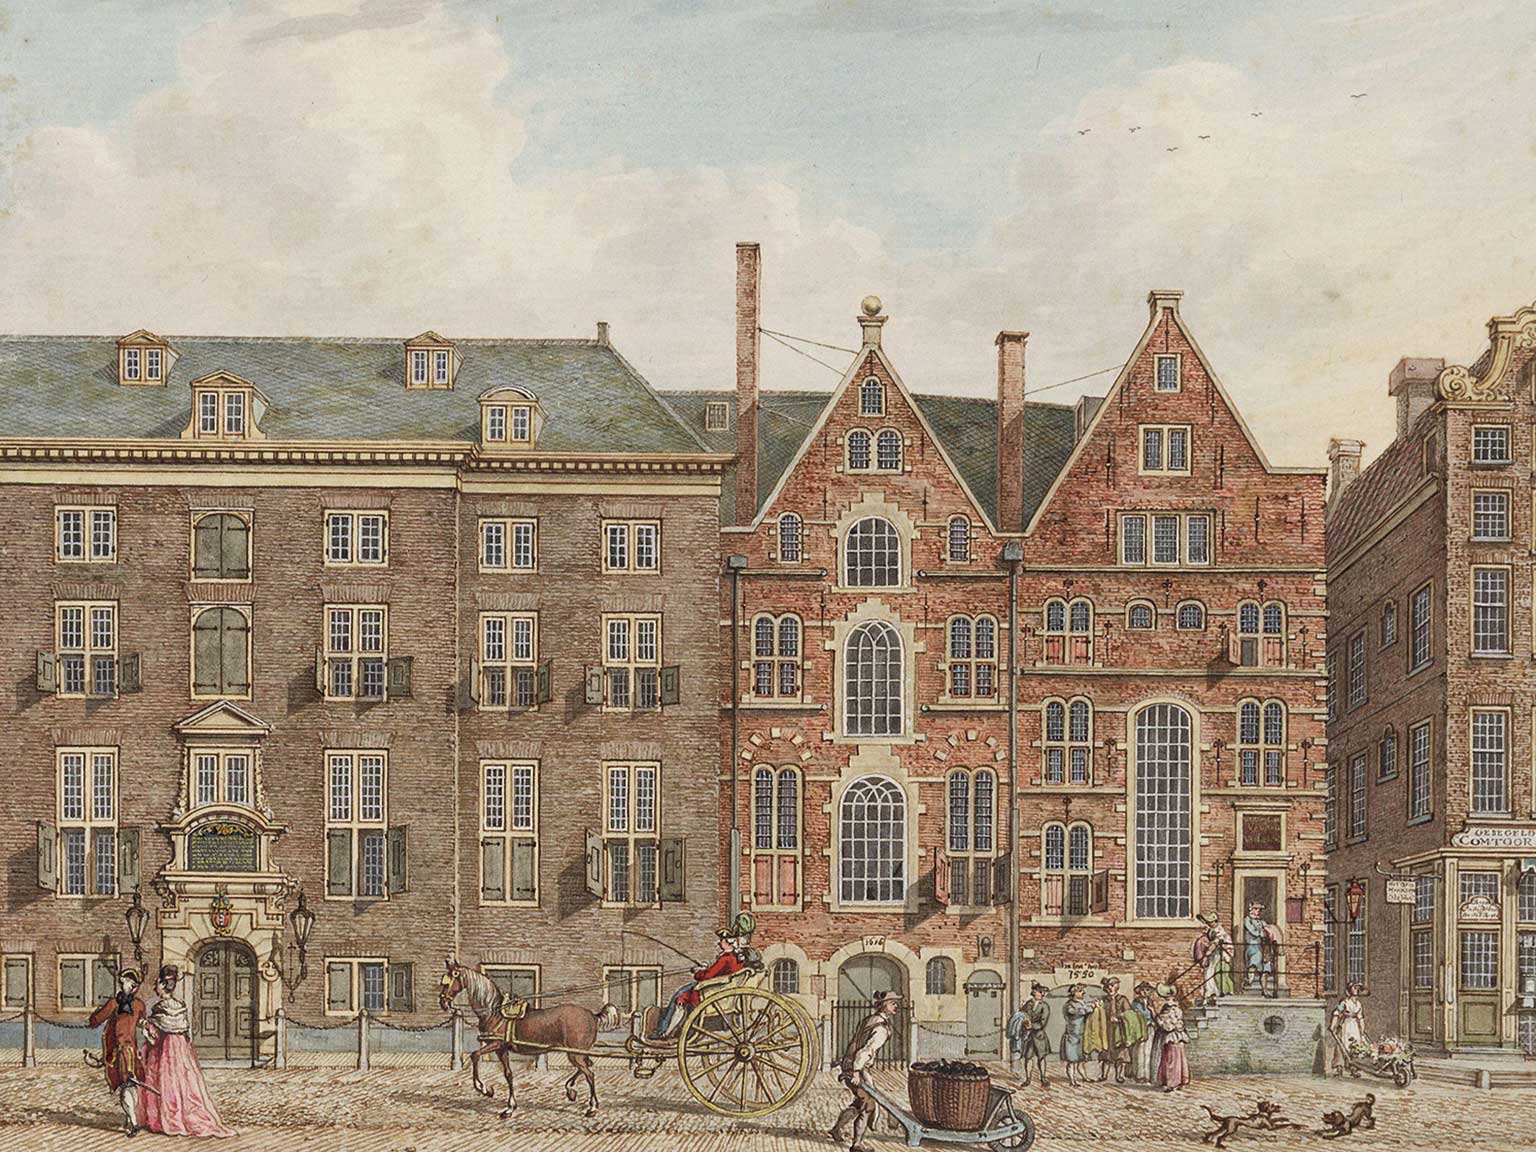 Oudezijds Voorburgwal 300-298, Amsterdam, drawing by H.P. Schouten from 1775